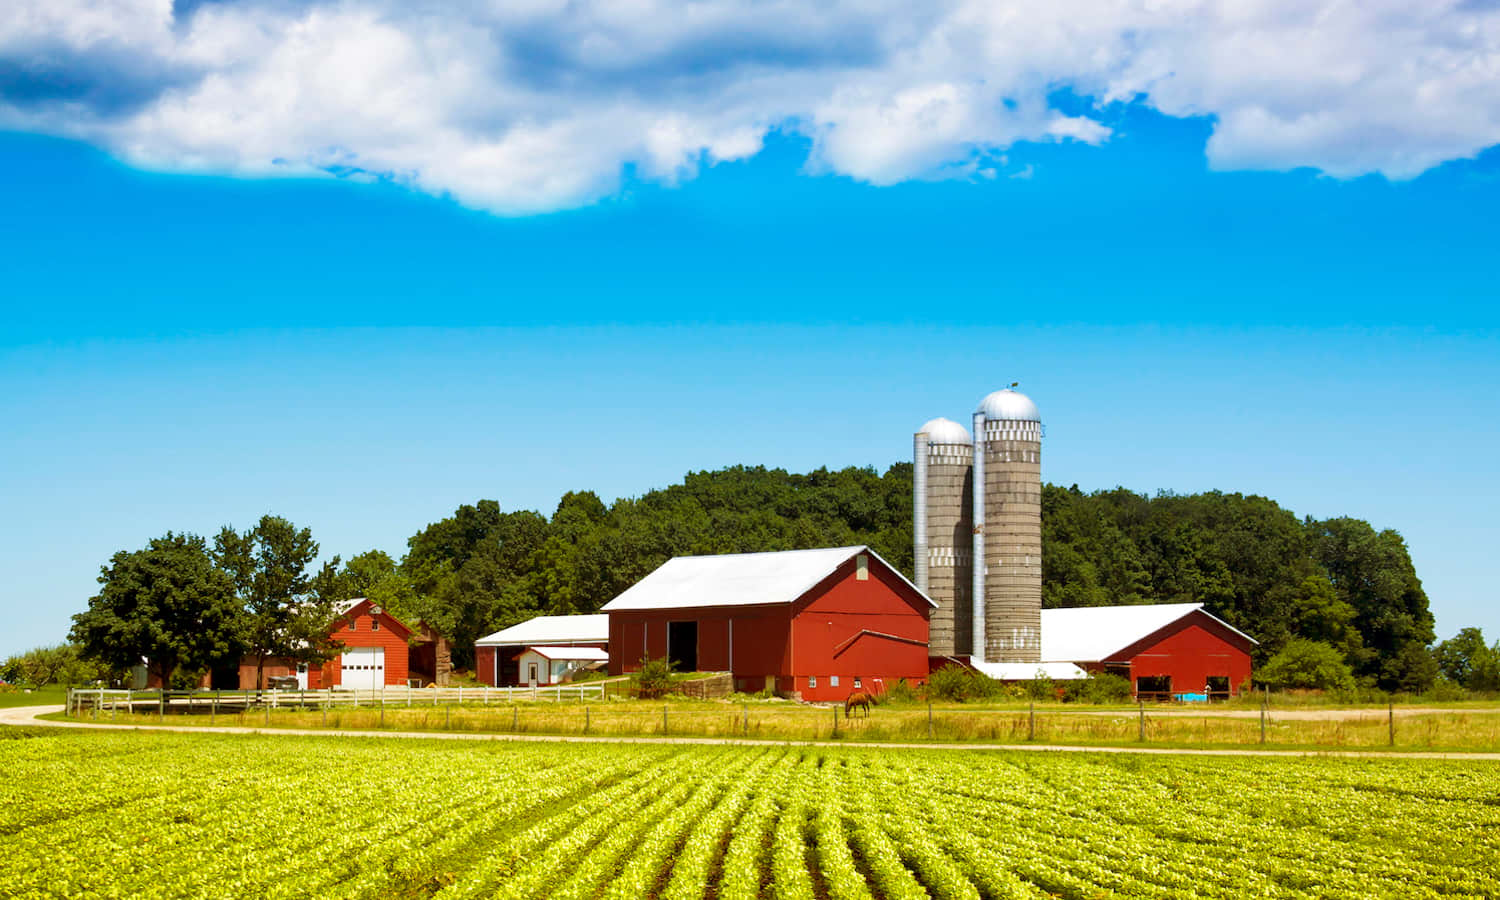 Farm Power: Definition and 5 basic sources of farm power